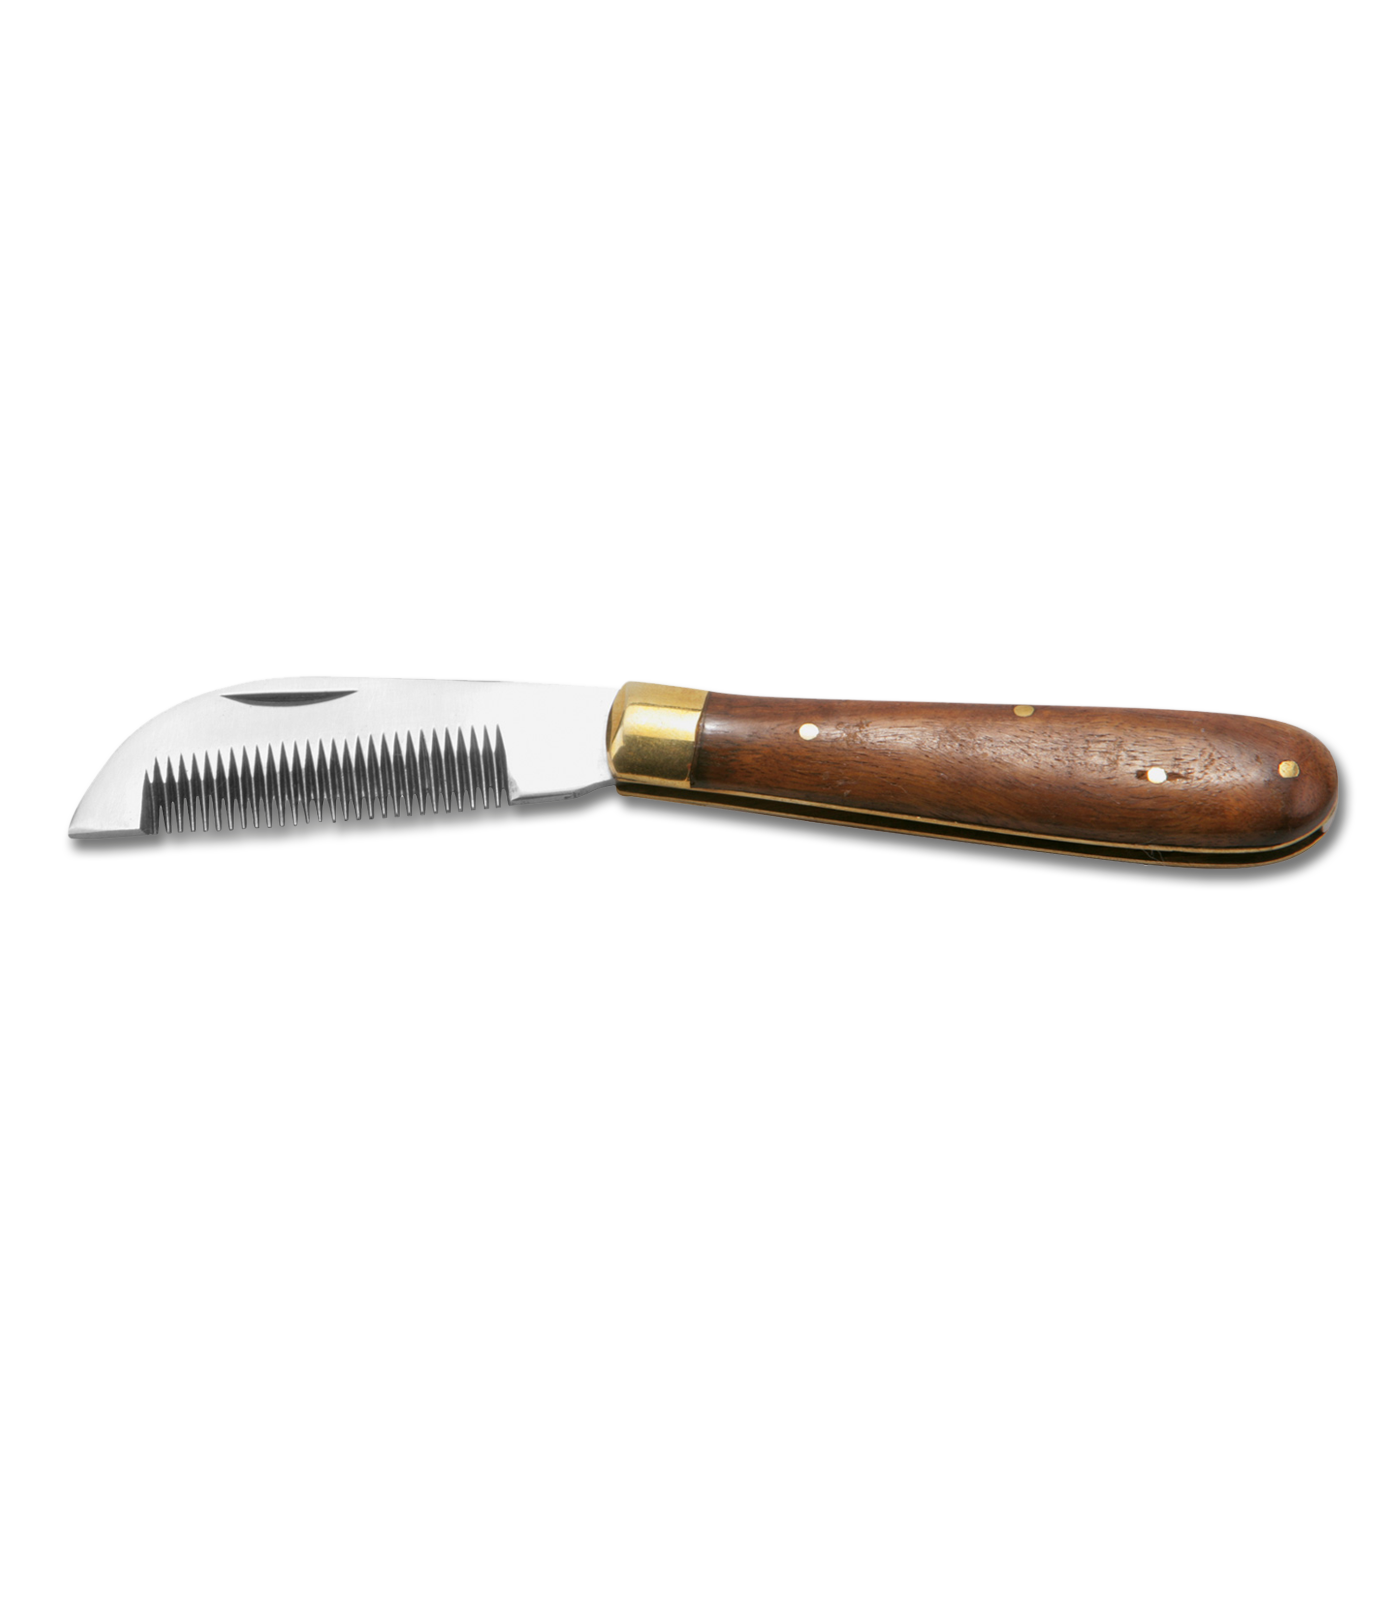 Thinning Knife, foldable